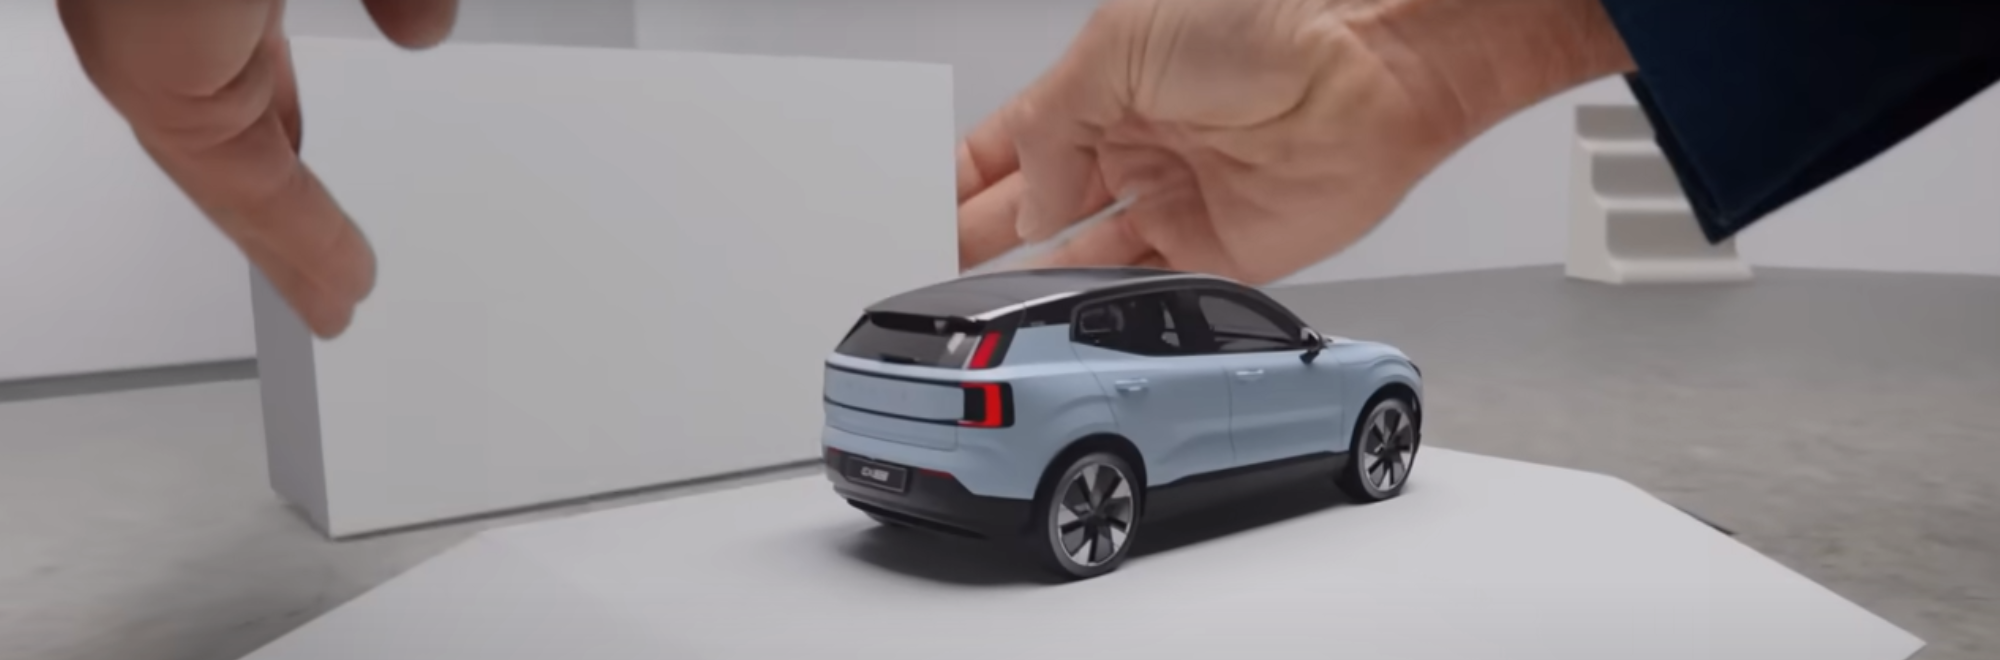 'The Unboxing': A seamless short film featuring Volvo's smallest SUV with the smallest carbon footprint yet